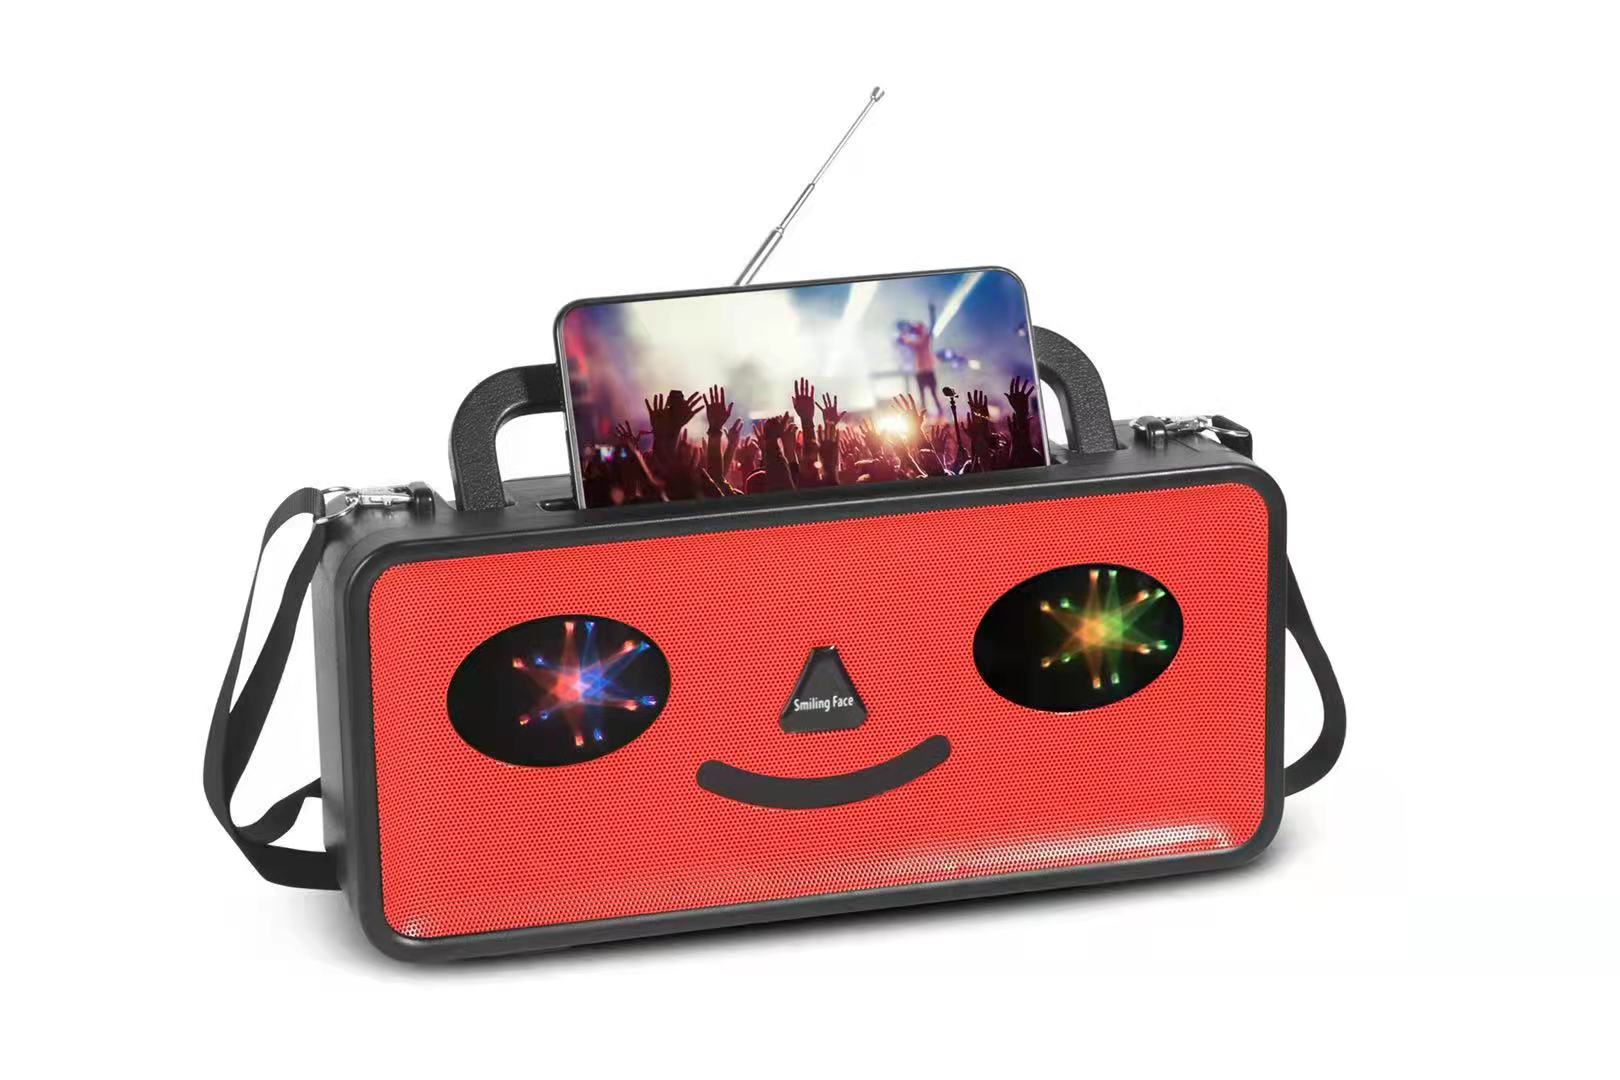 ''Big Smiling Face Design Portable Bluetooth Speaker  for Phone, Device, MUSIC, USB (Red)''